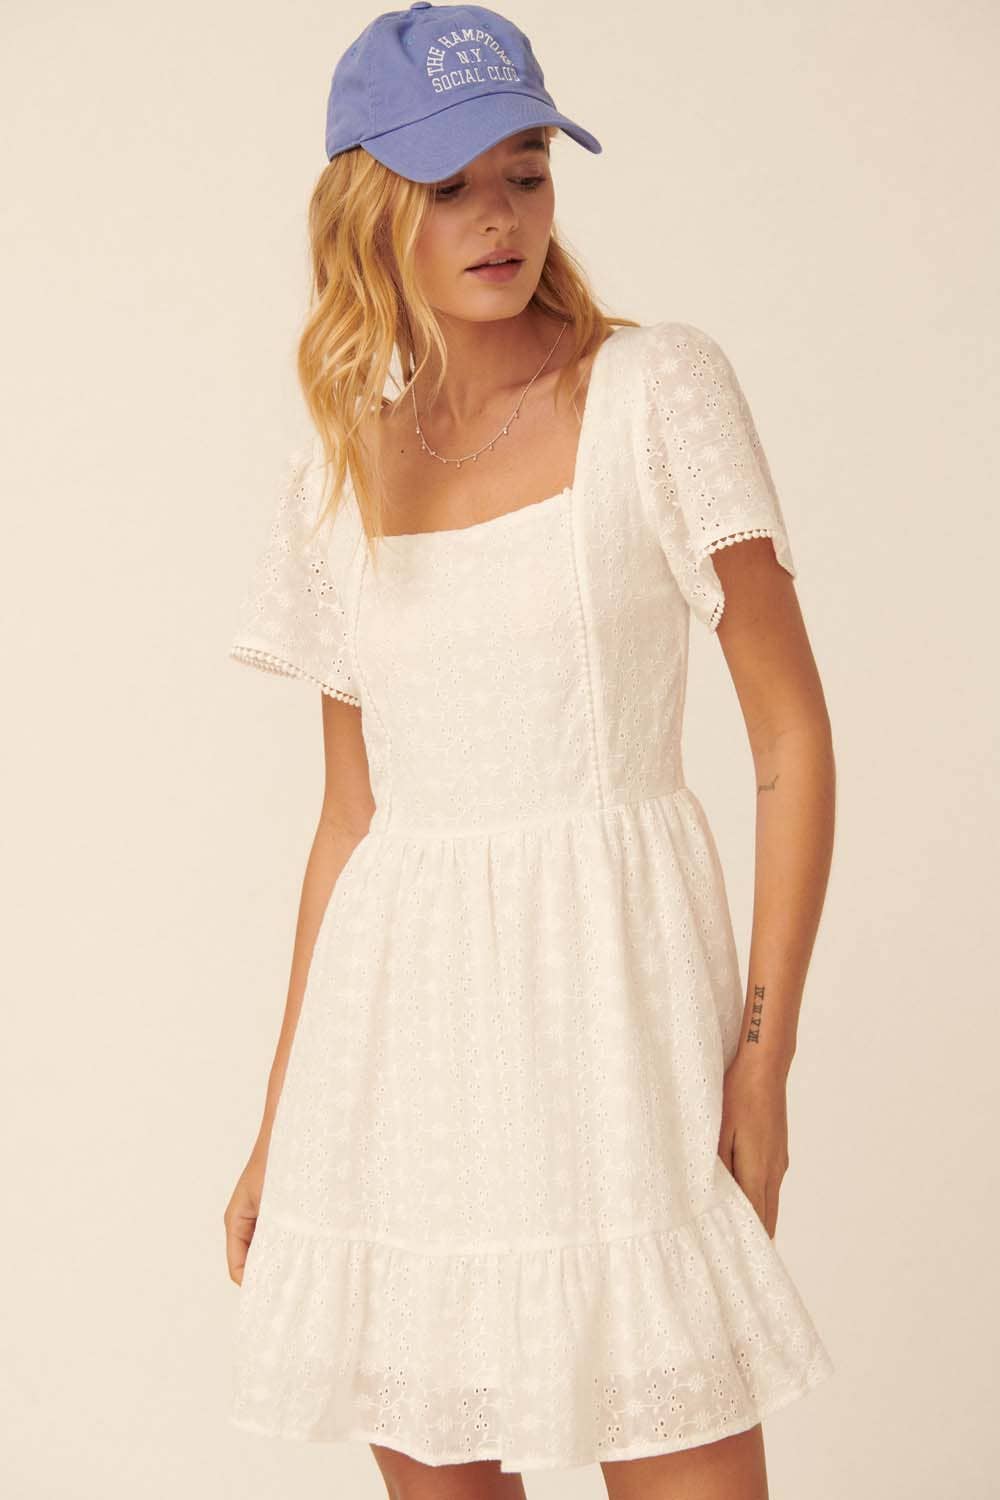 Eyelet Lace Floral Square Neck Smocked Lace Dress